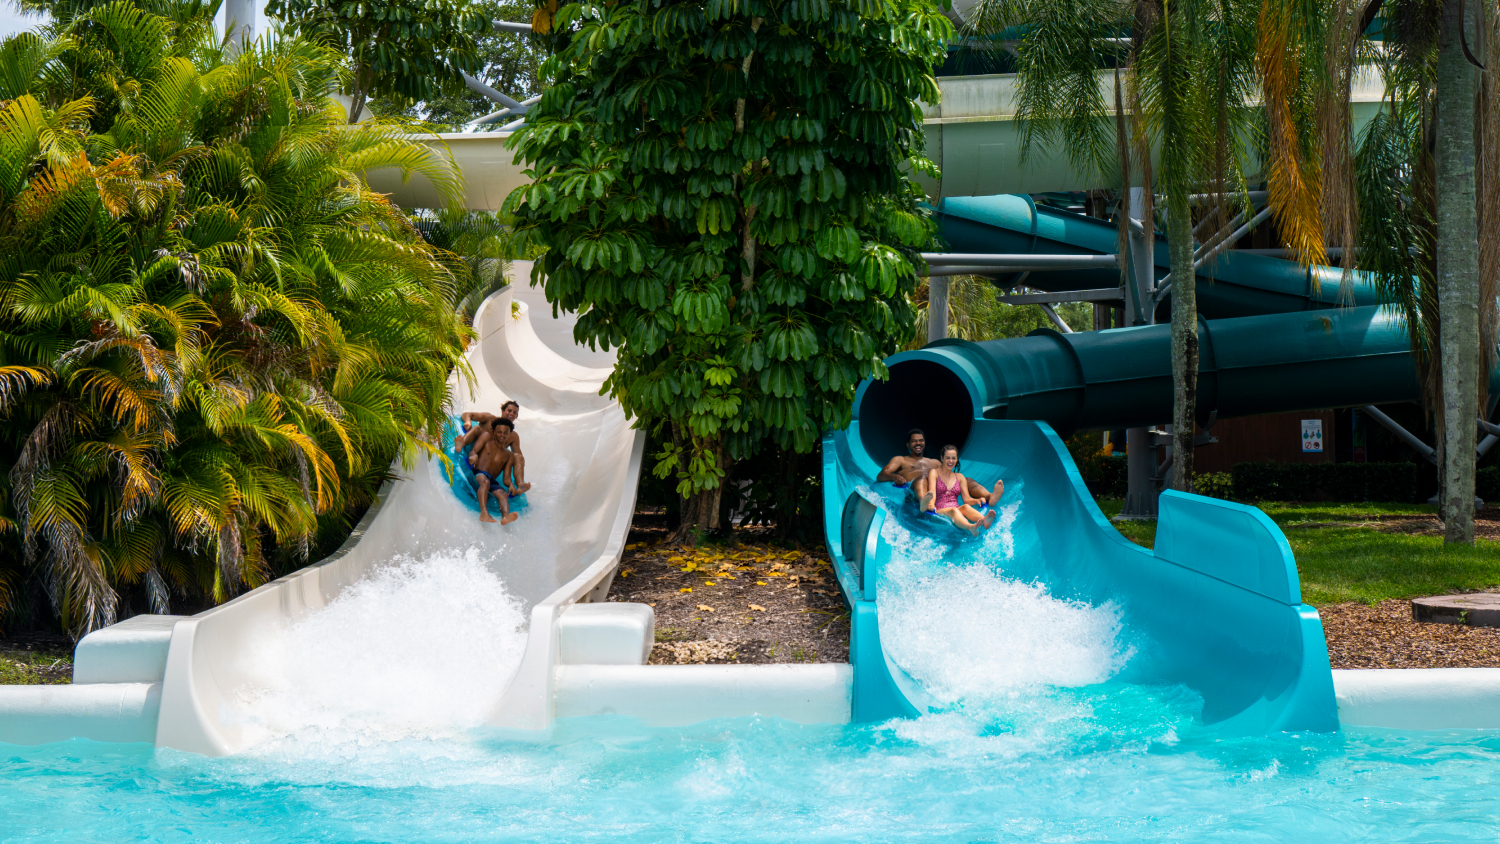 Two water slides at Adventure Island